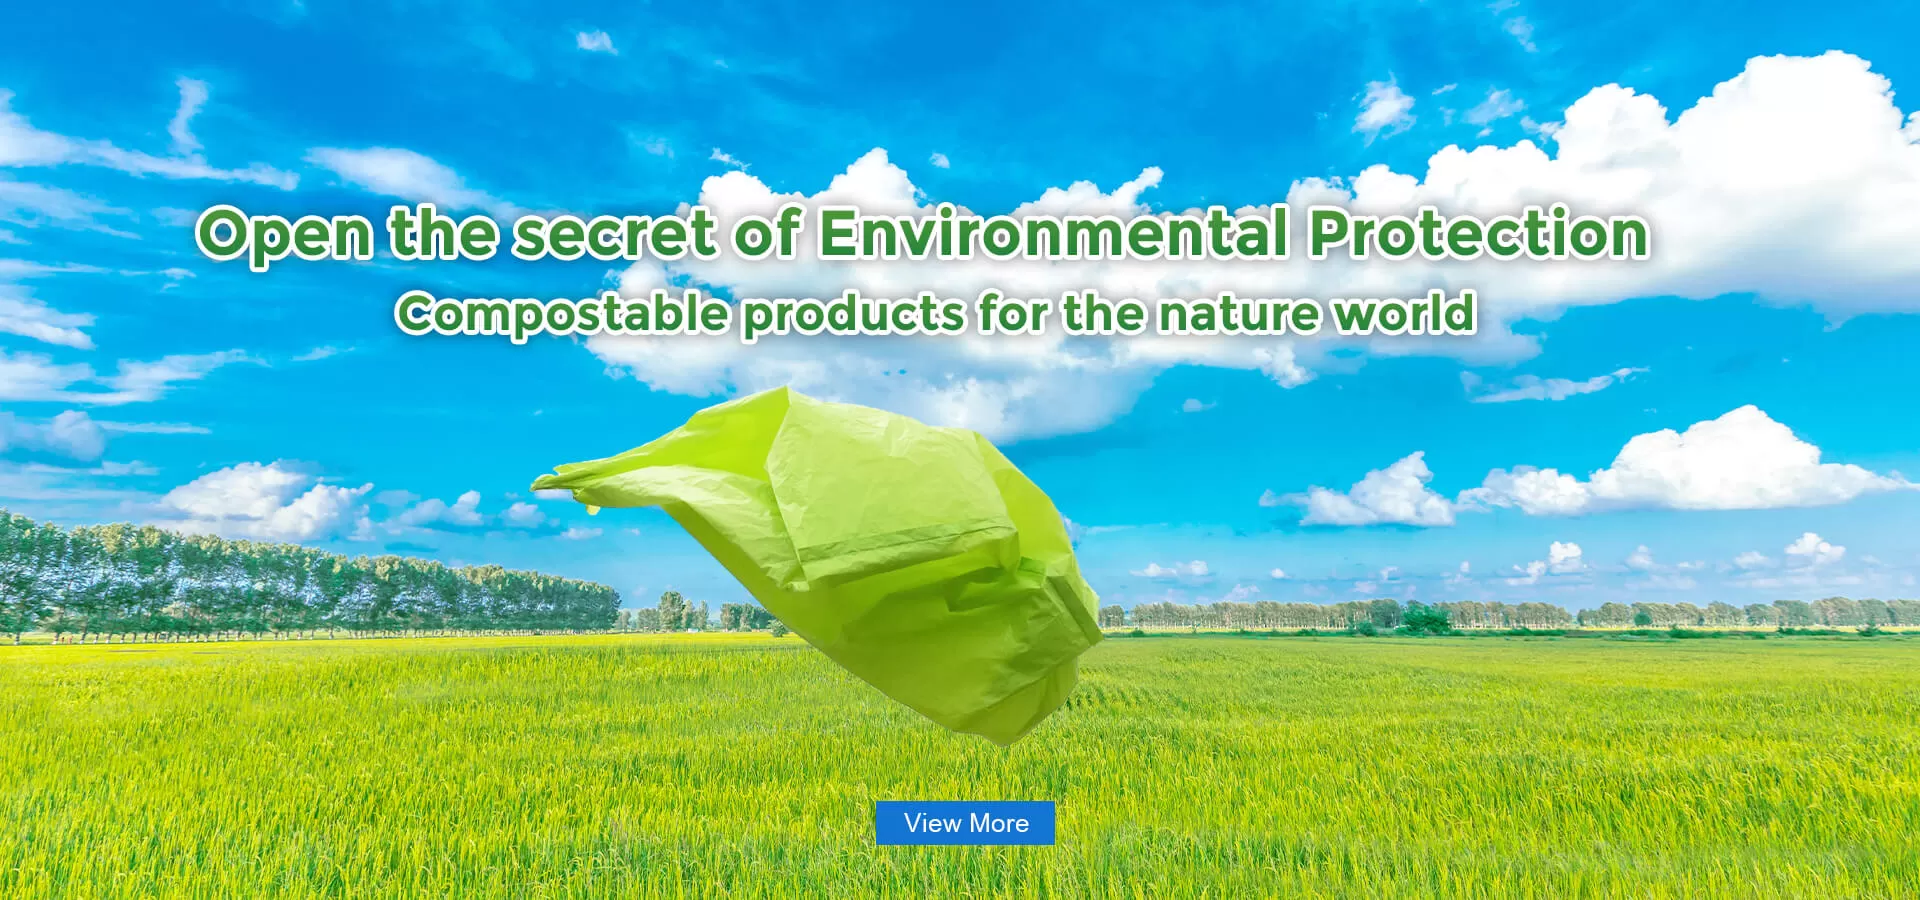 Open the secret of Environmental Protection Compostable products for the nature world